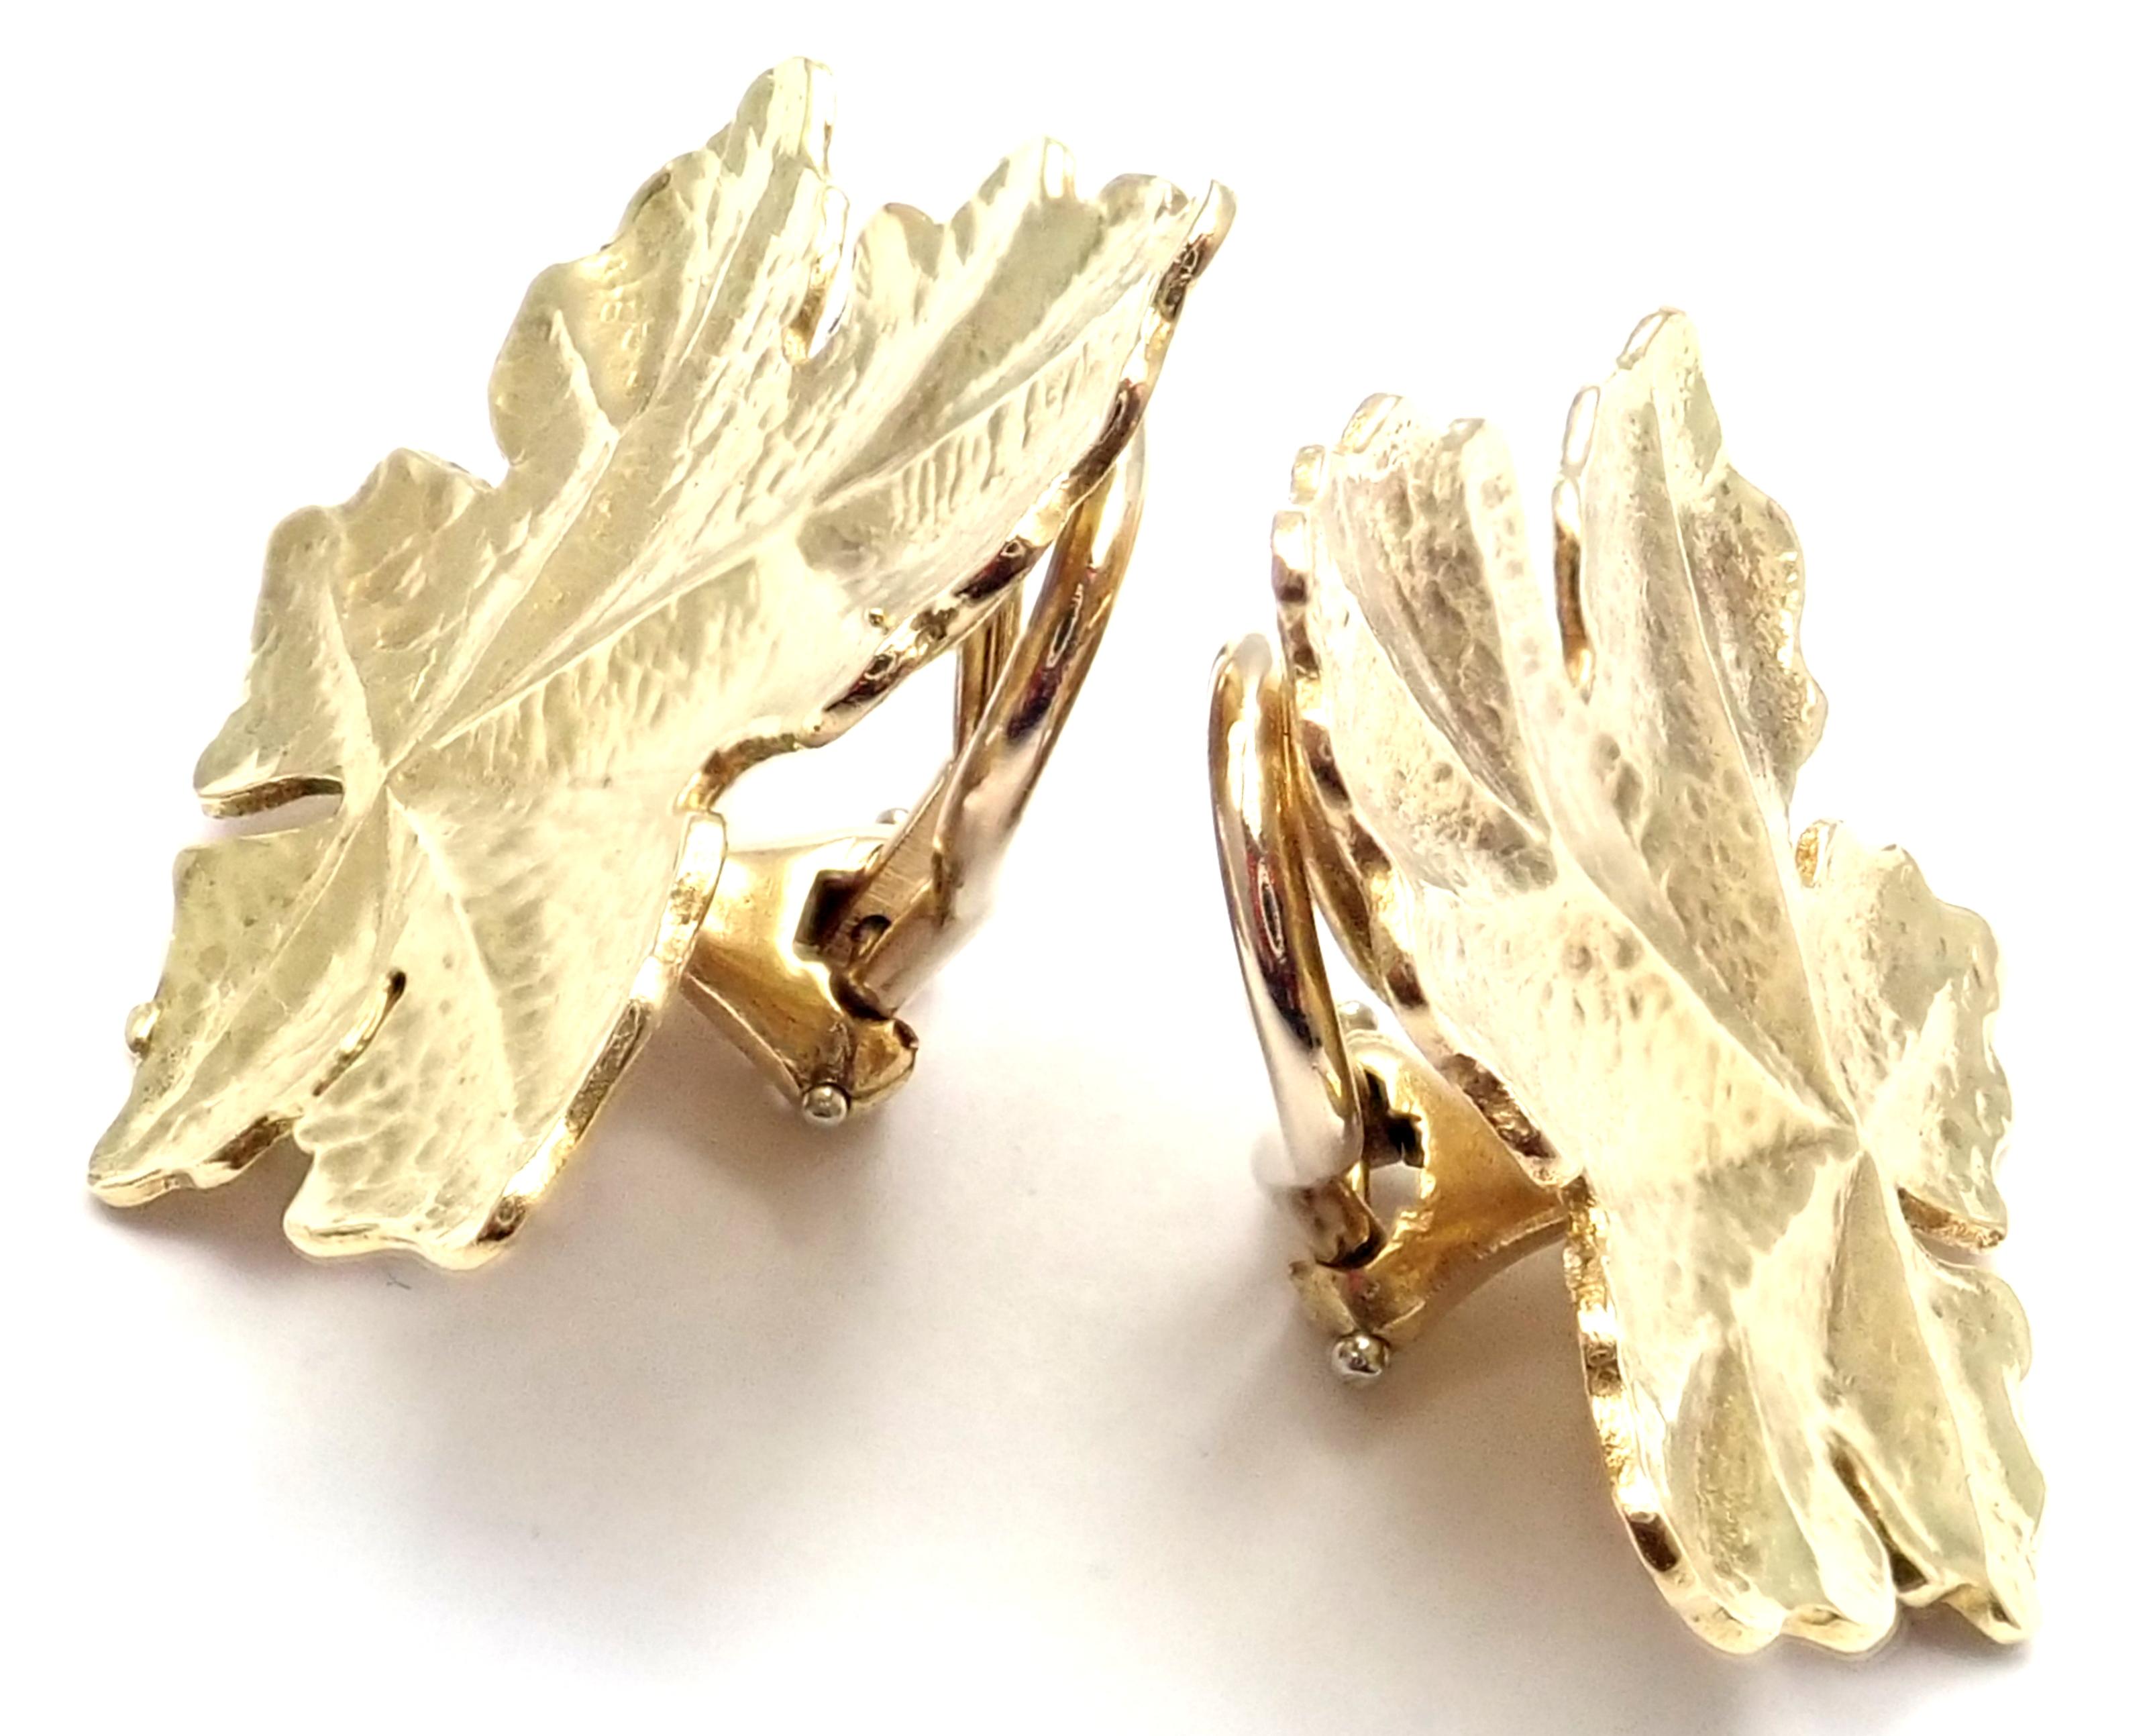 18k Yellow Gold Vintage Leaf Earrings by Tiffany & Co.
These earrings are made for non pierced ears, but they can be converted by adding posts.
Details:
Weight: 11 grams
Dimensions: 25mm x 26mm
Stamped Hallmarks: Tiffany & Co 18k 1982
*Free Shipping